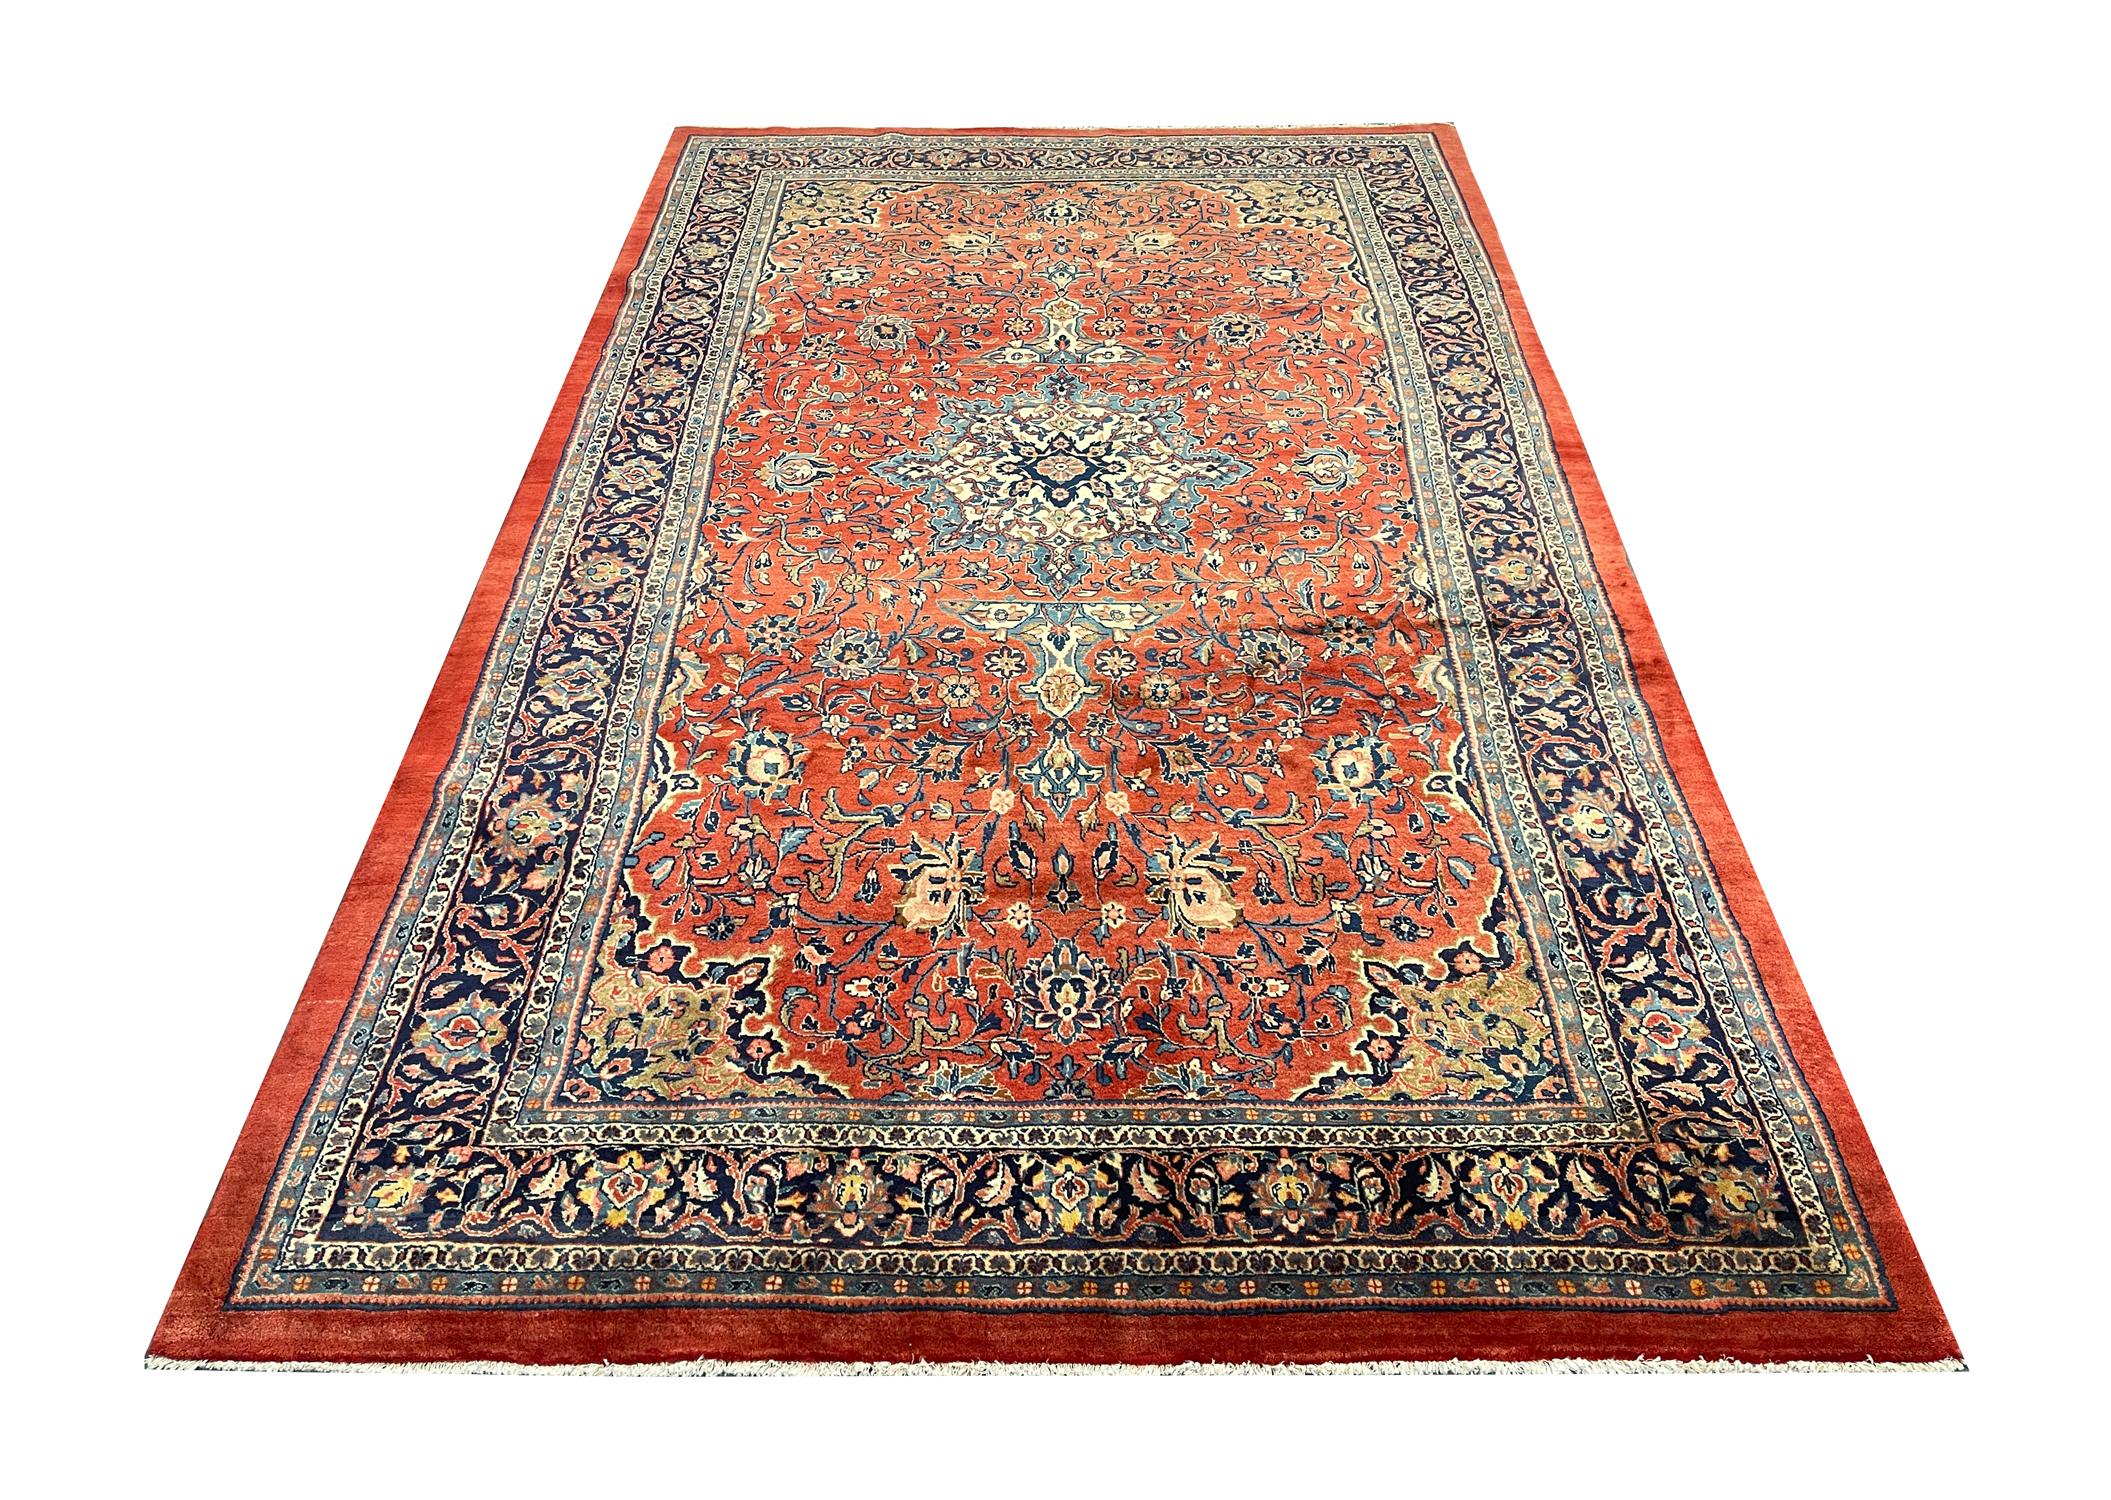 This elegant wool rug has been decorated with a fantastic central medallion design with a highly-decorative surround and bored, adorned with floral motifs that have been symmetrically woven with a high level of detail. Red, Rust, yellow and brown